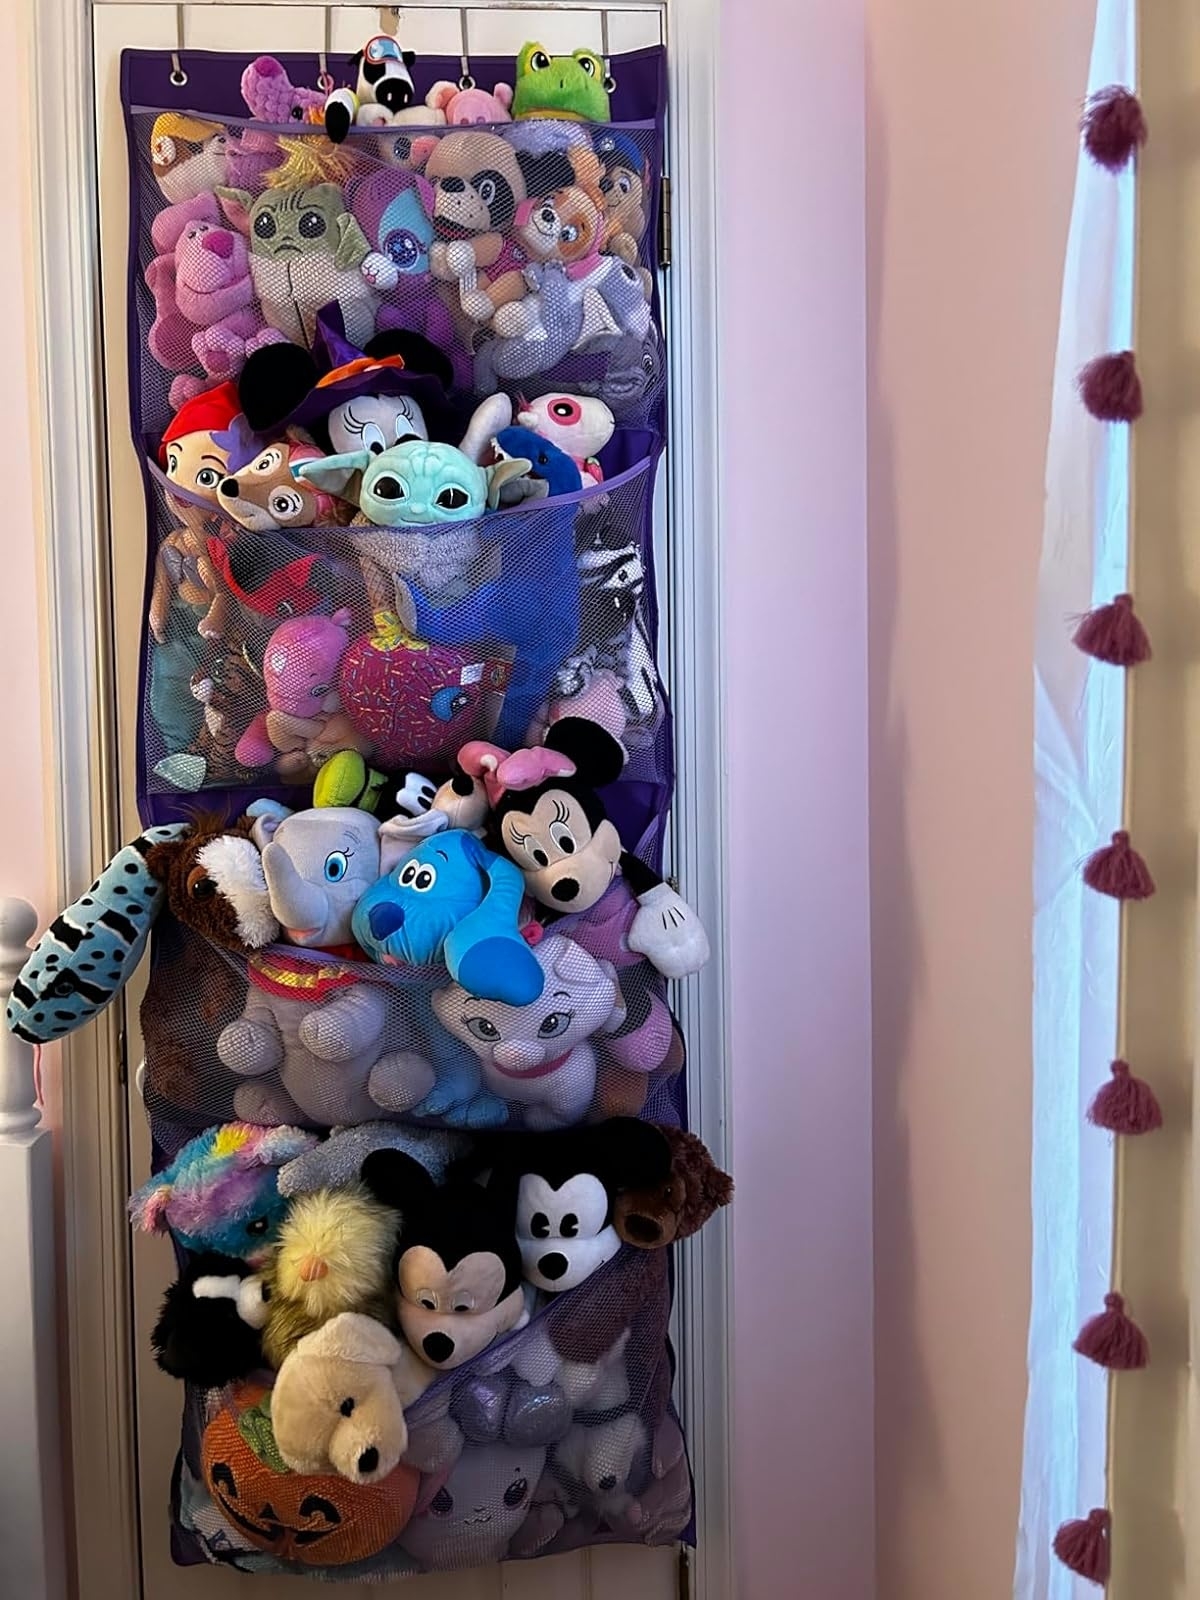 A hanging organizer filled with various plush toys including Disney characters.